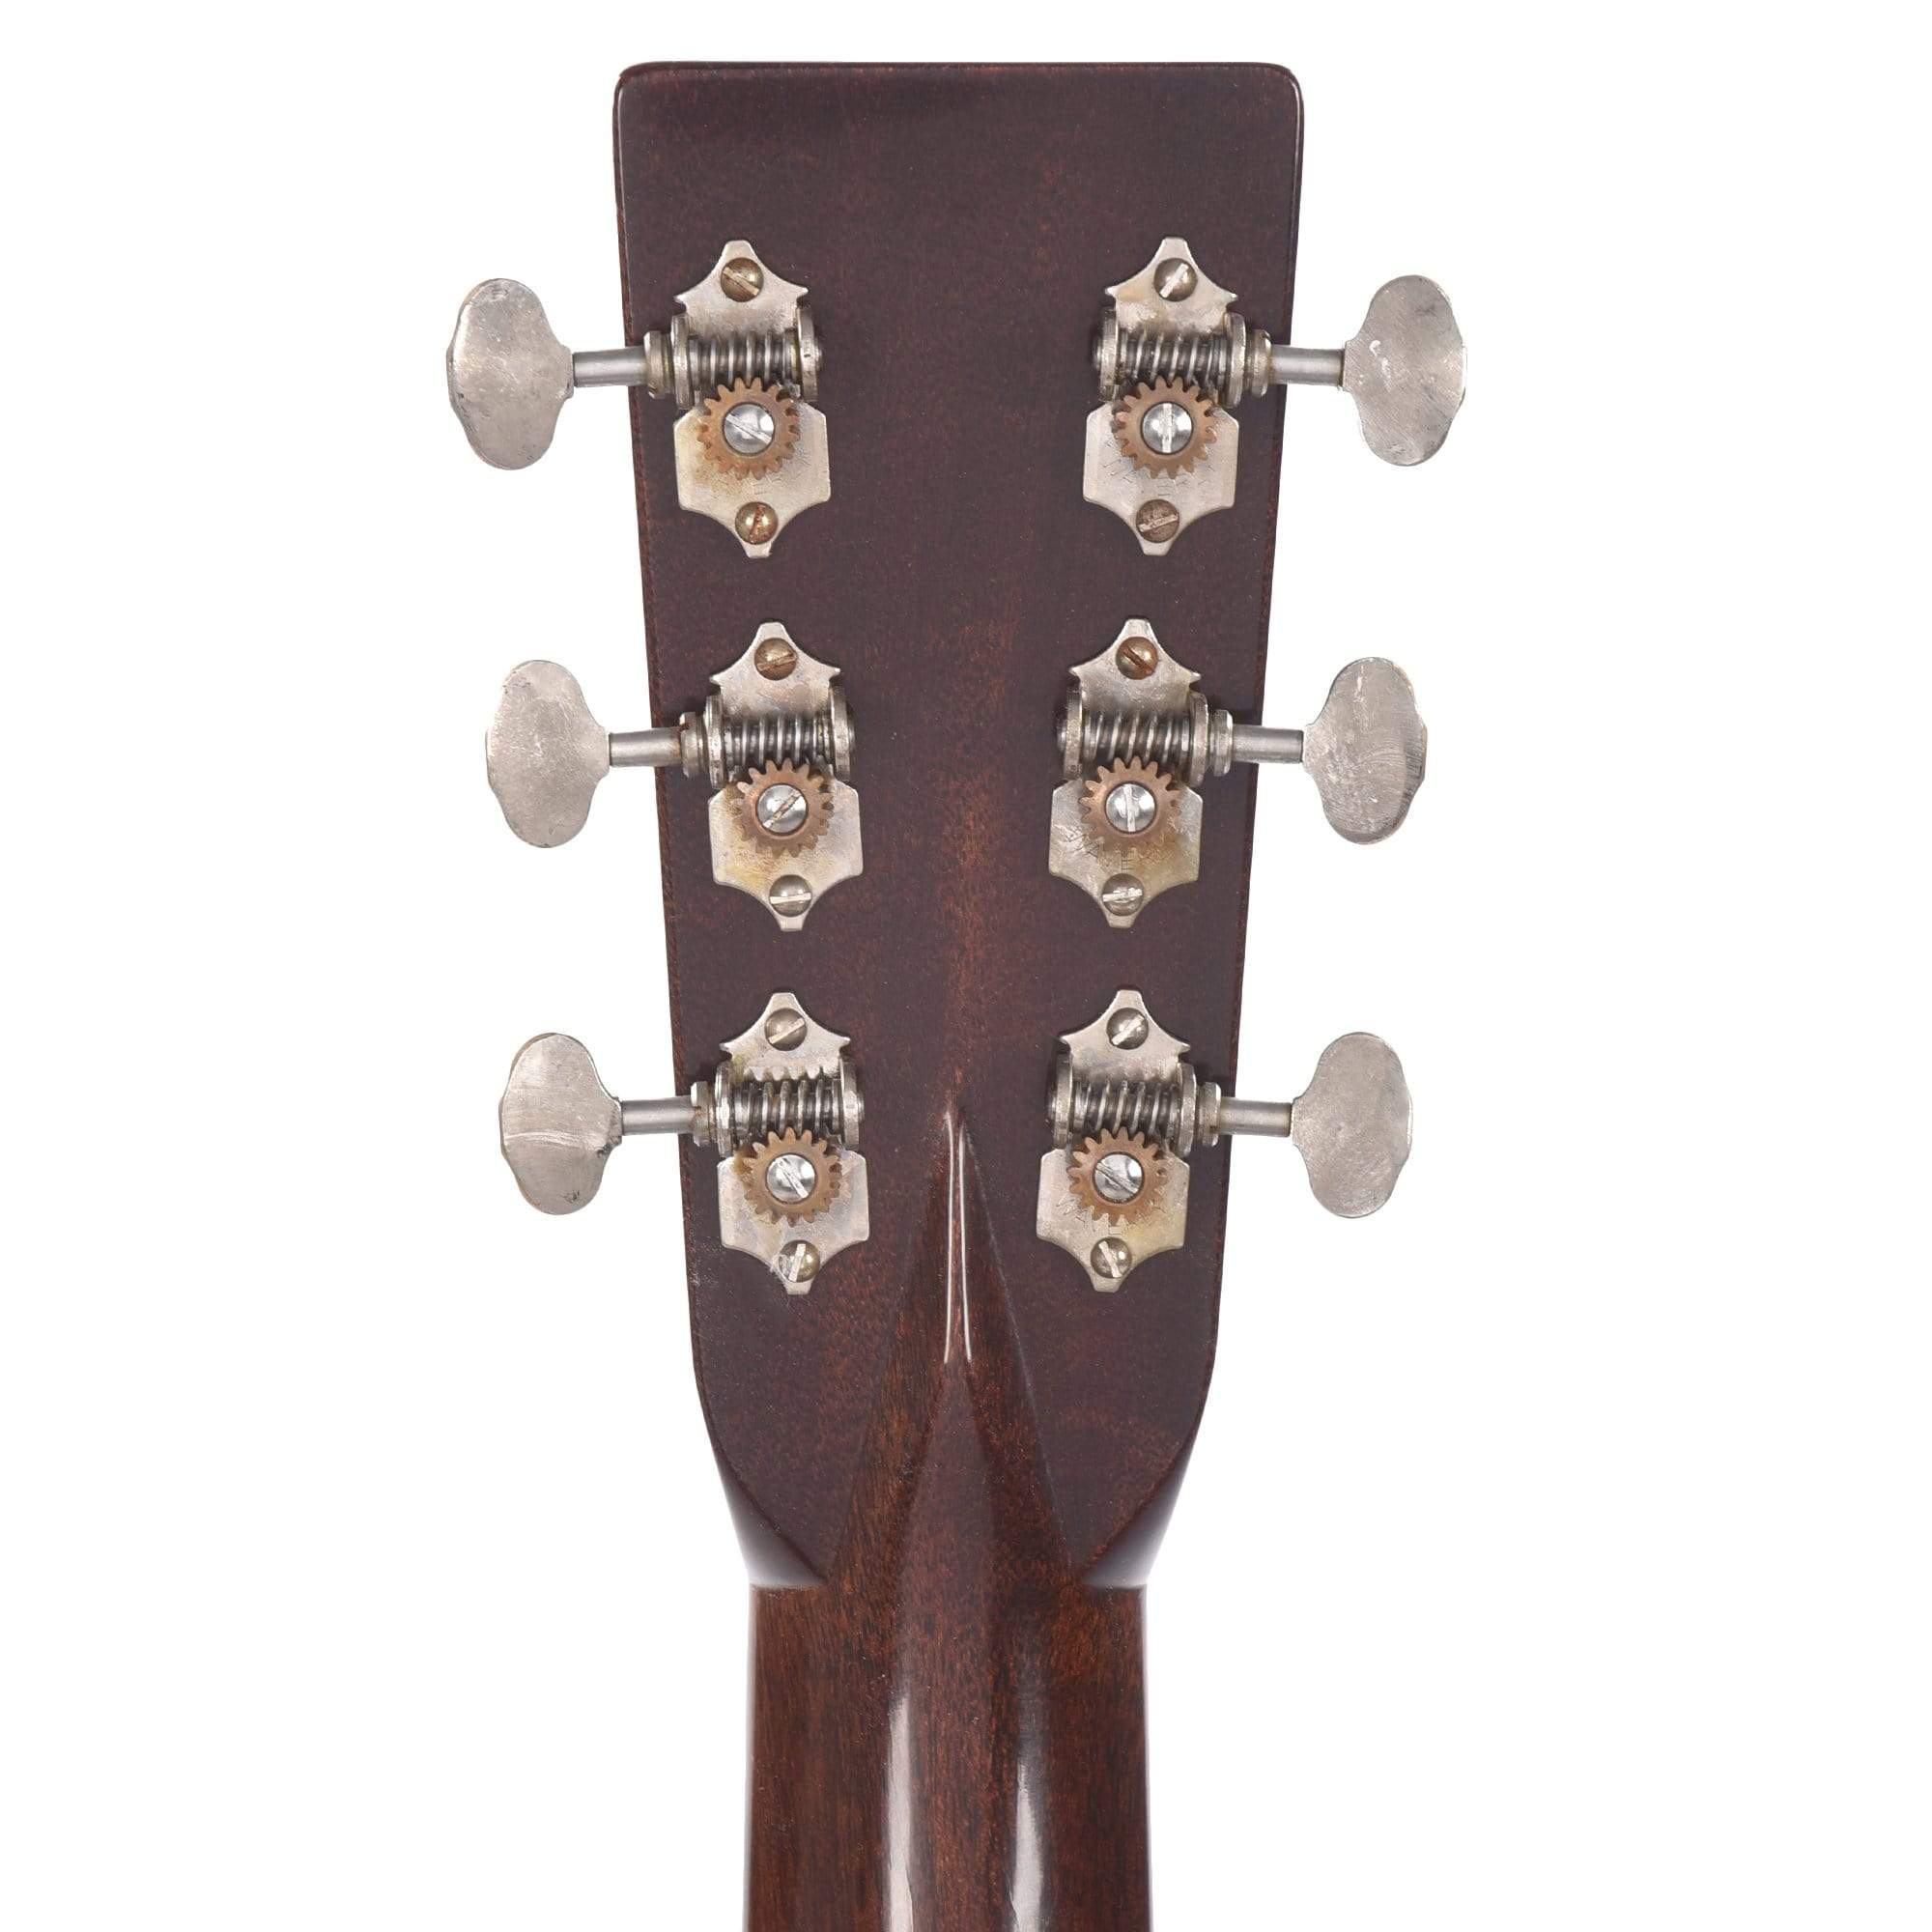 Martin Custom Shop 000-28 Authentic 1937 Aged Ambertone Vintage Low Gloss Acoustic Guitars / OM and Auditorium